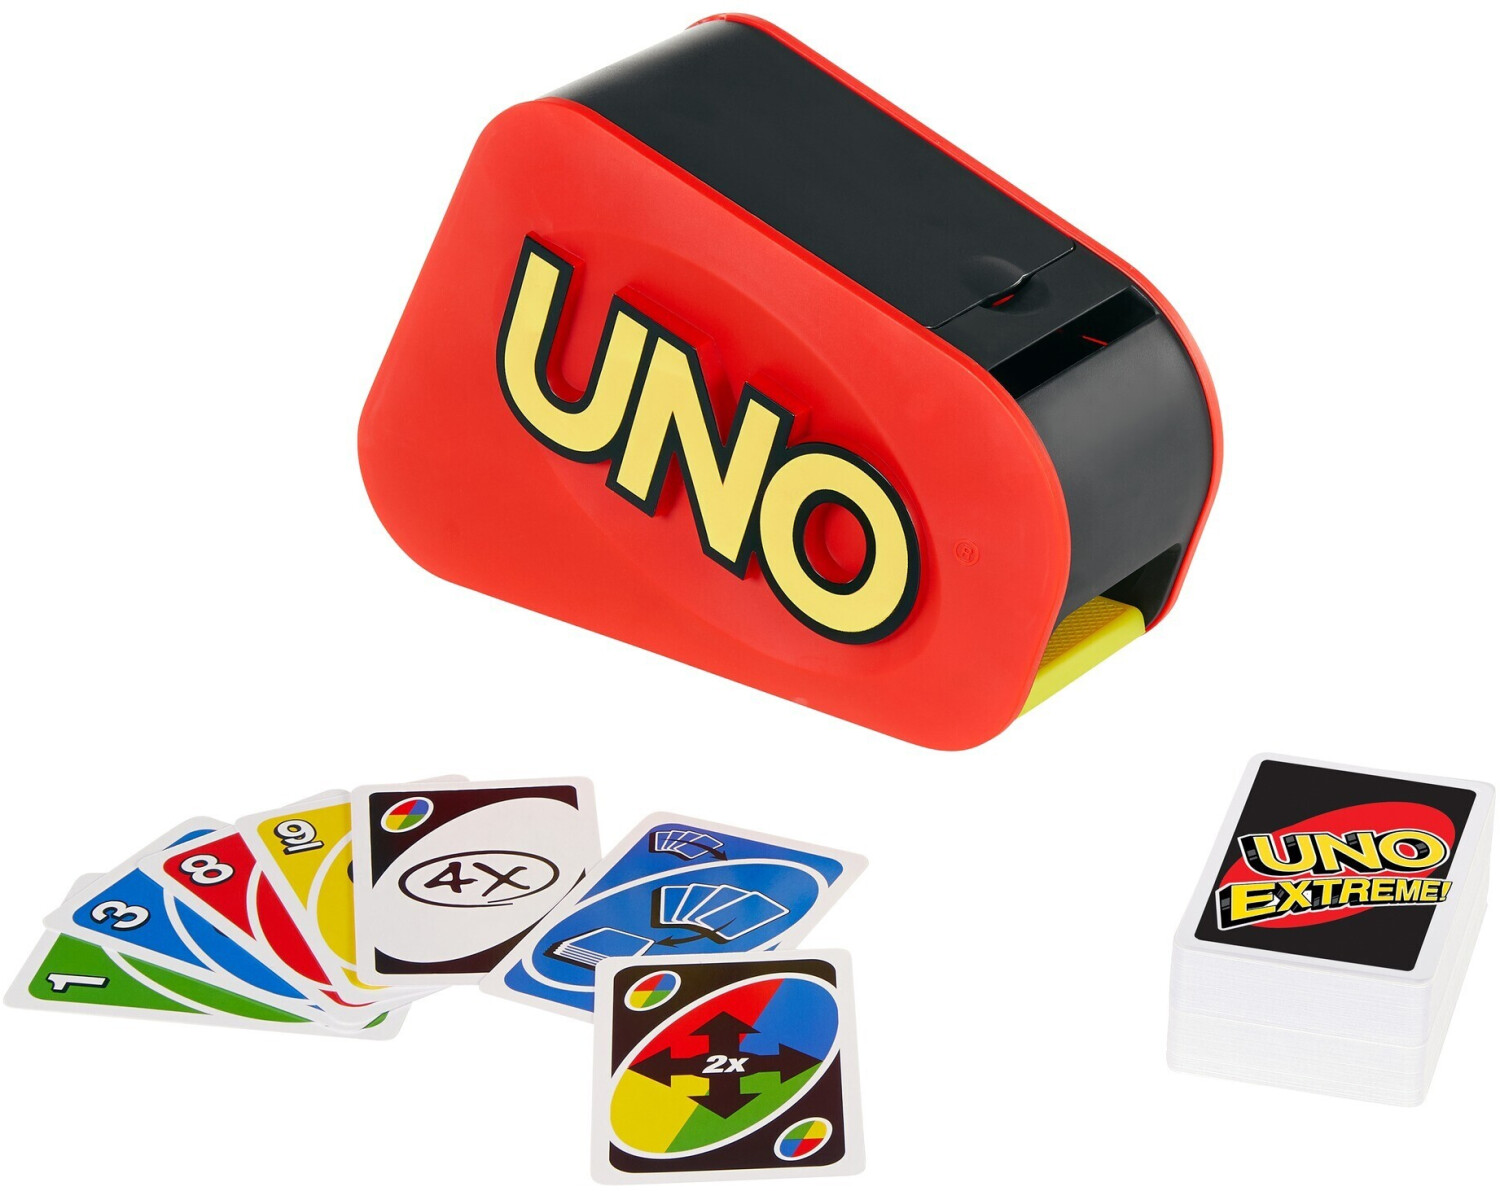 UNO Party Pack of 4 Card Games for Kids & Adults Featuring UNO